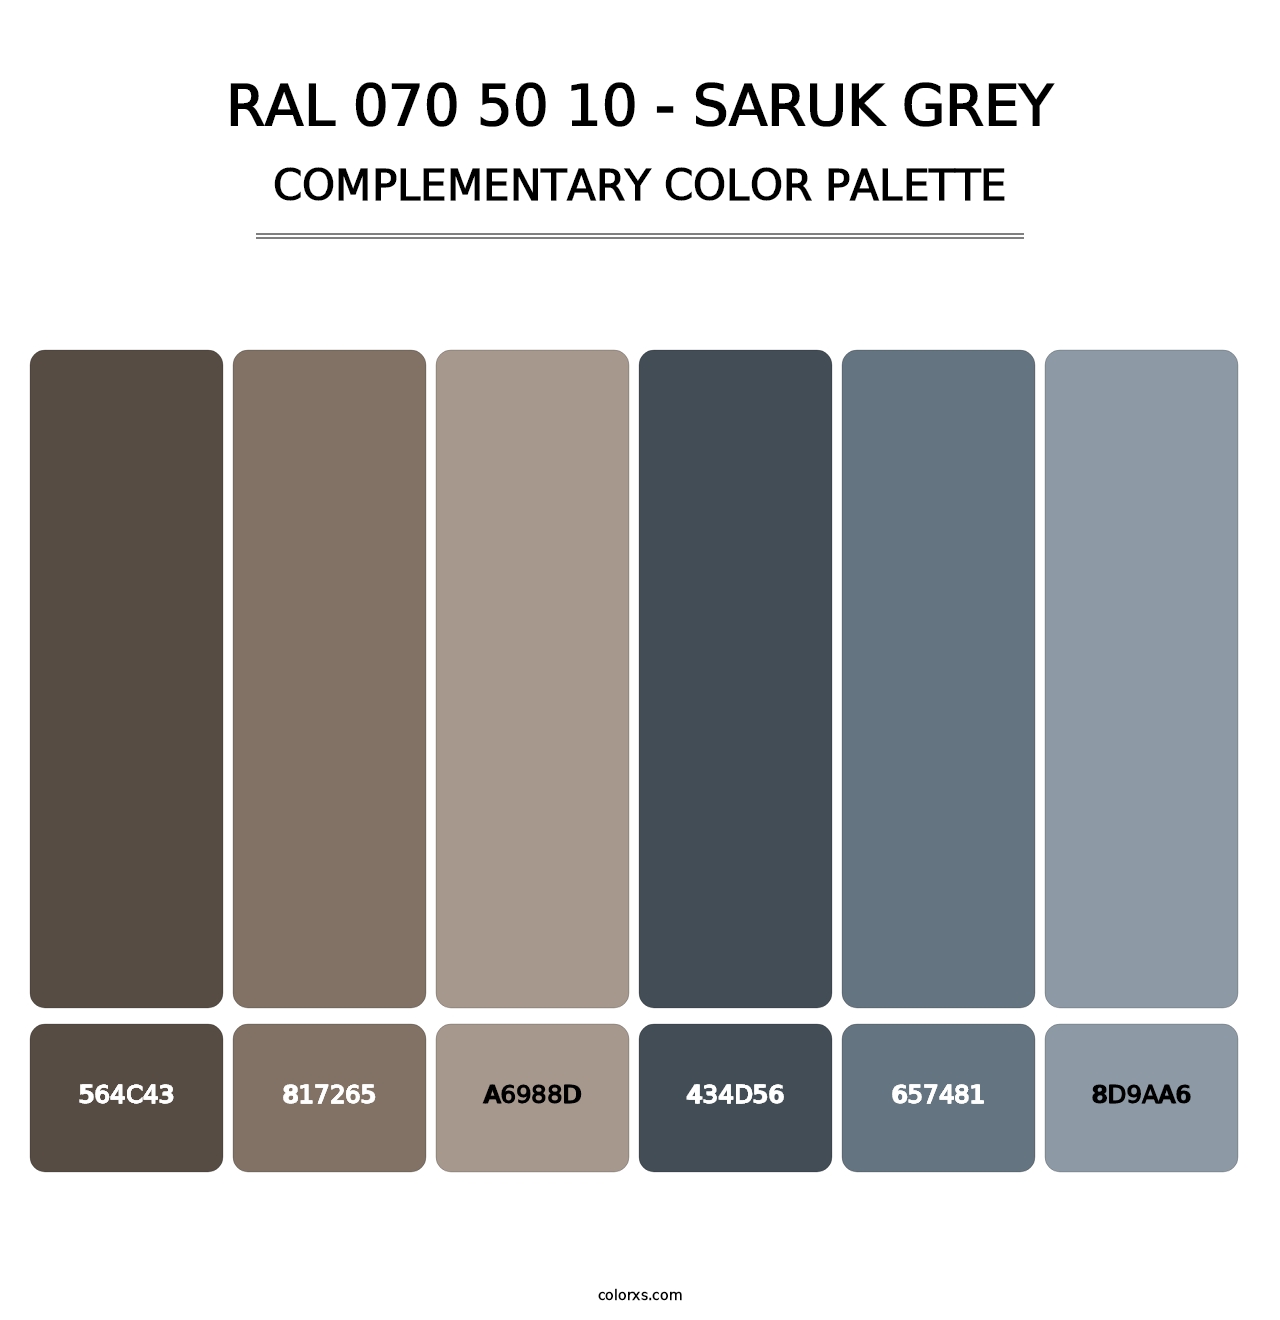 RAL 070 50 10 - Saruk Grey - Complementary Color Palette